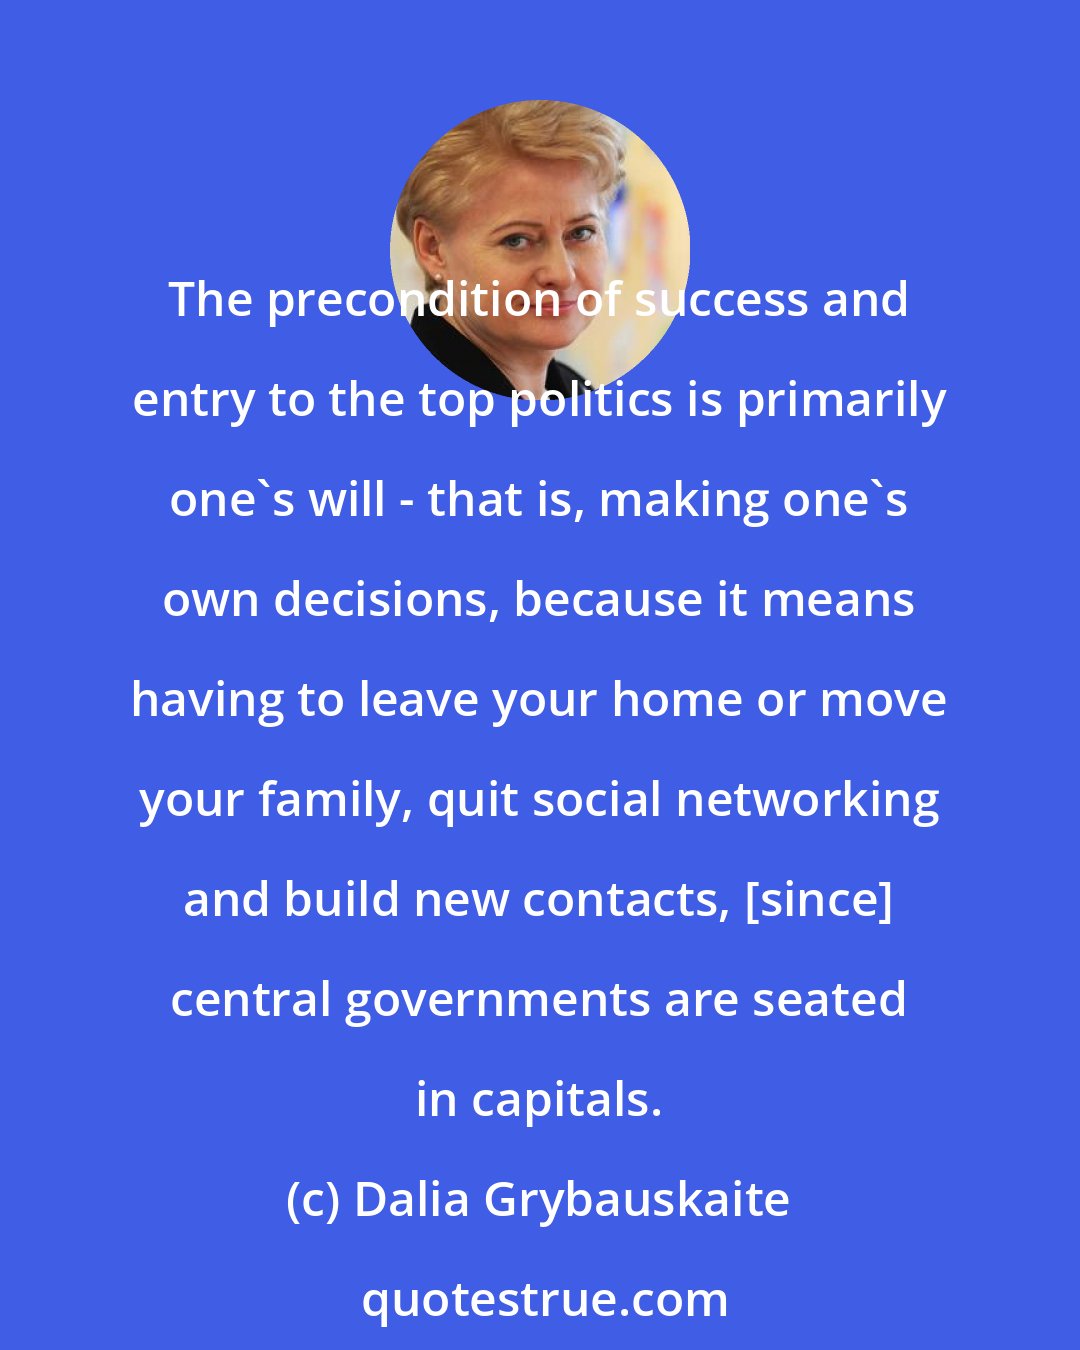 Dalia Grybauskaite: The precondition of success and entry to the top politics is primarily one's will - that is, making one's own decisions, because it means having to leave your home or move your family, quit social networking and build new contacts, [since] central governments are seated in capitals.